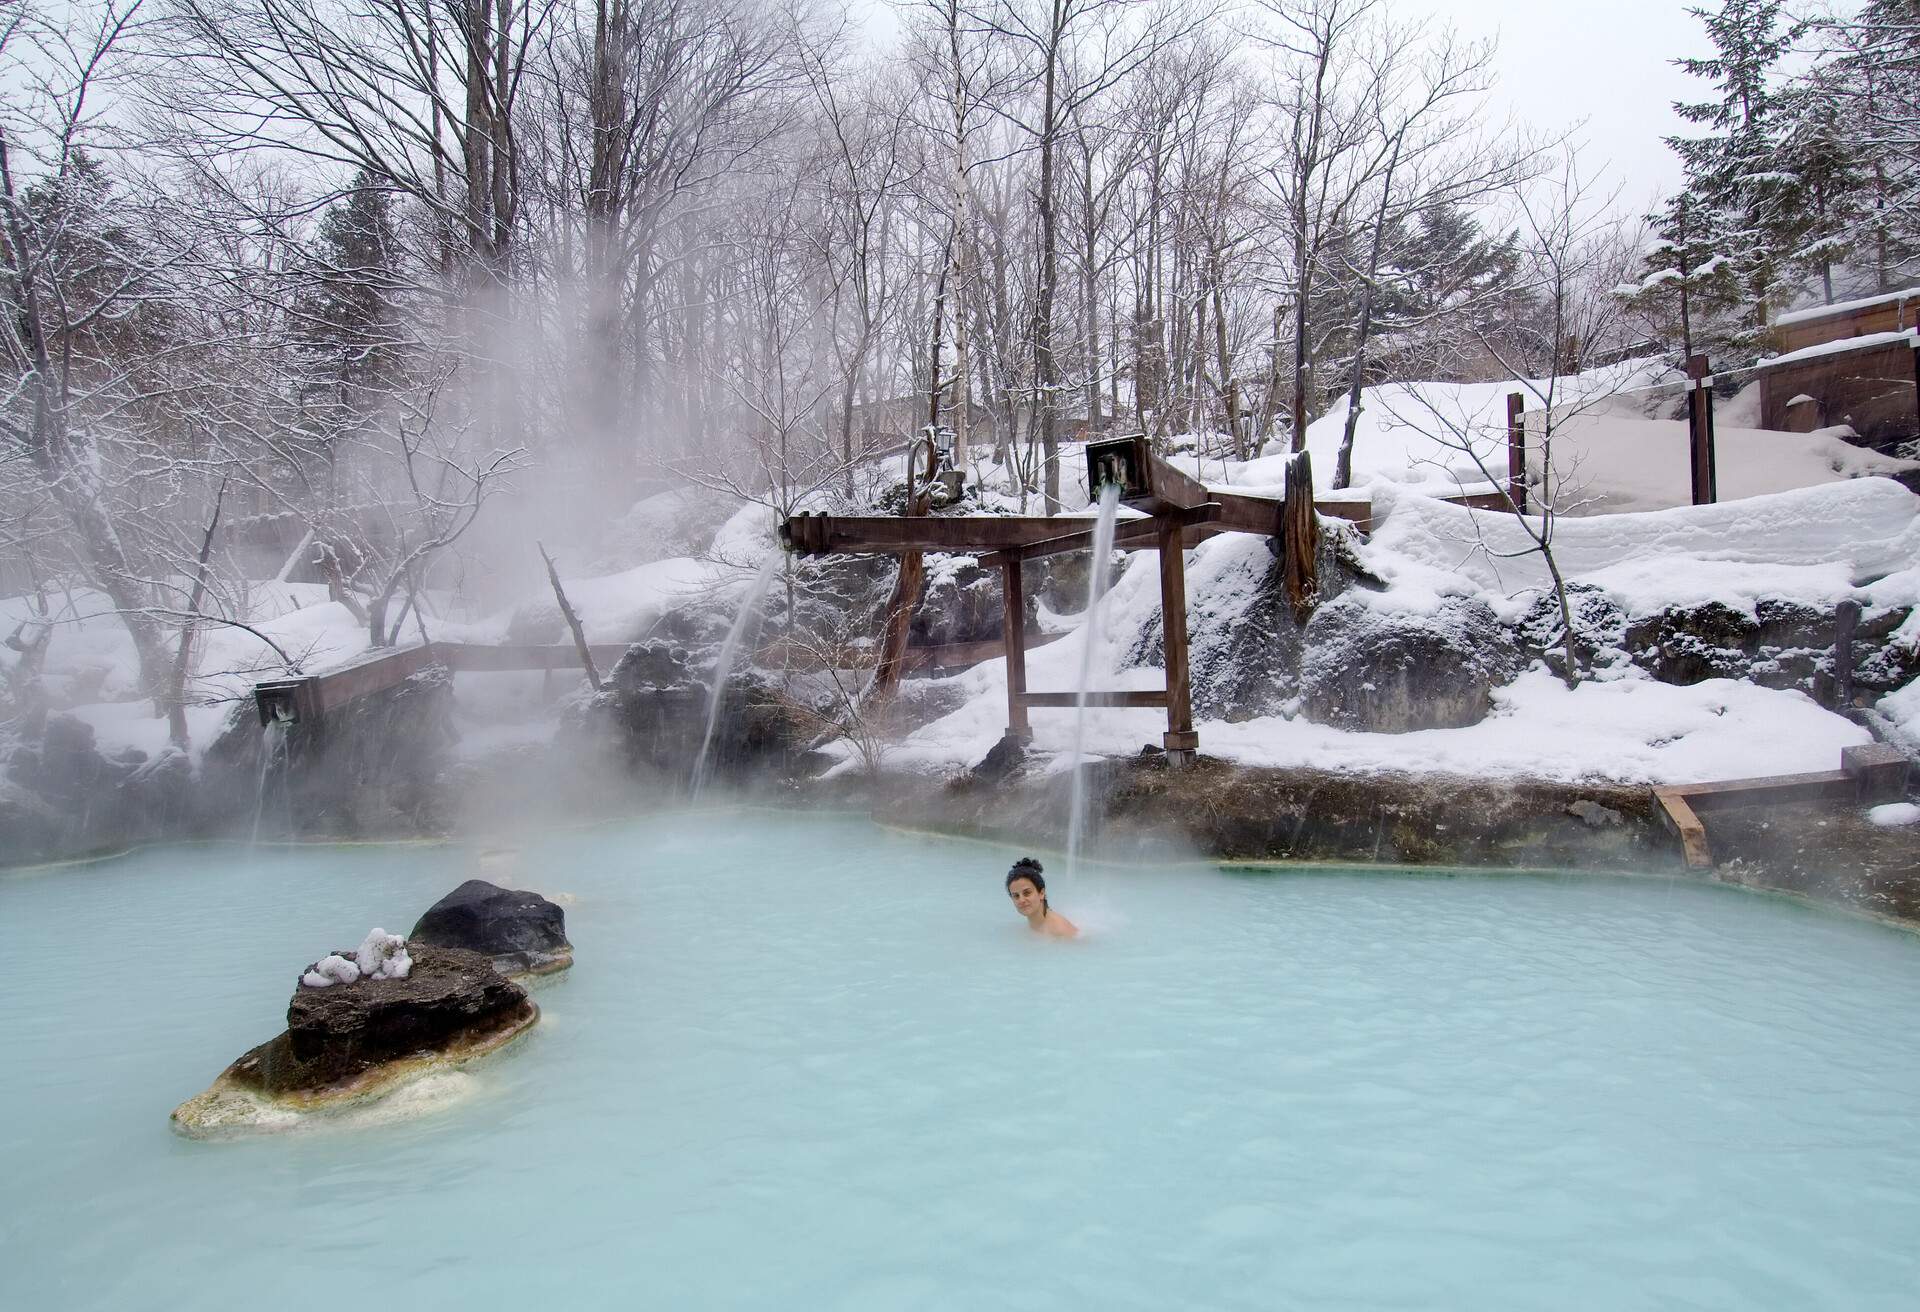 A woman dips into a steaming outdoor hot spring surrounded by frosted trees and snow-covered landscapes.